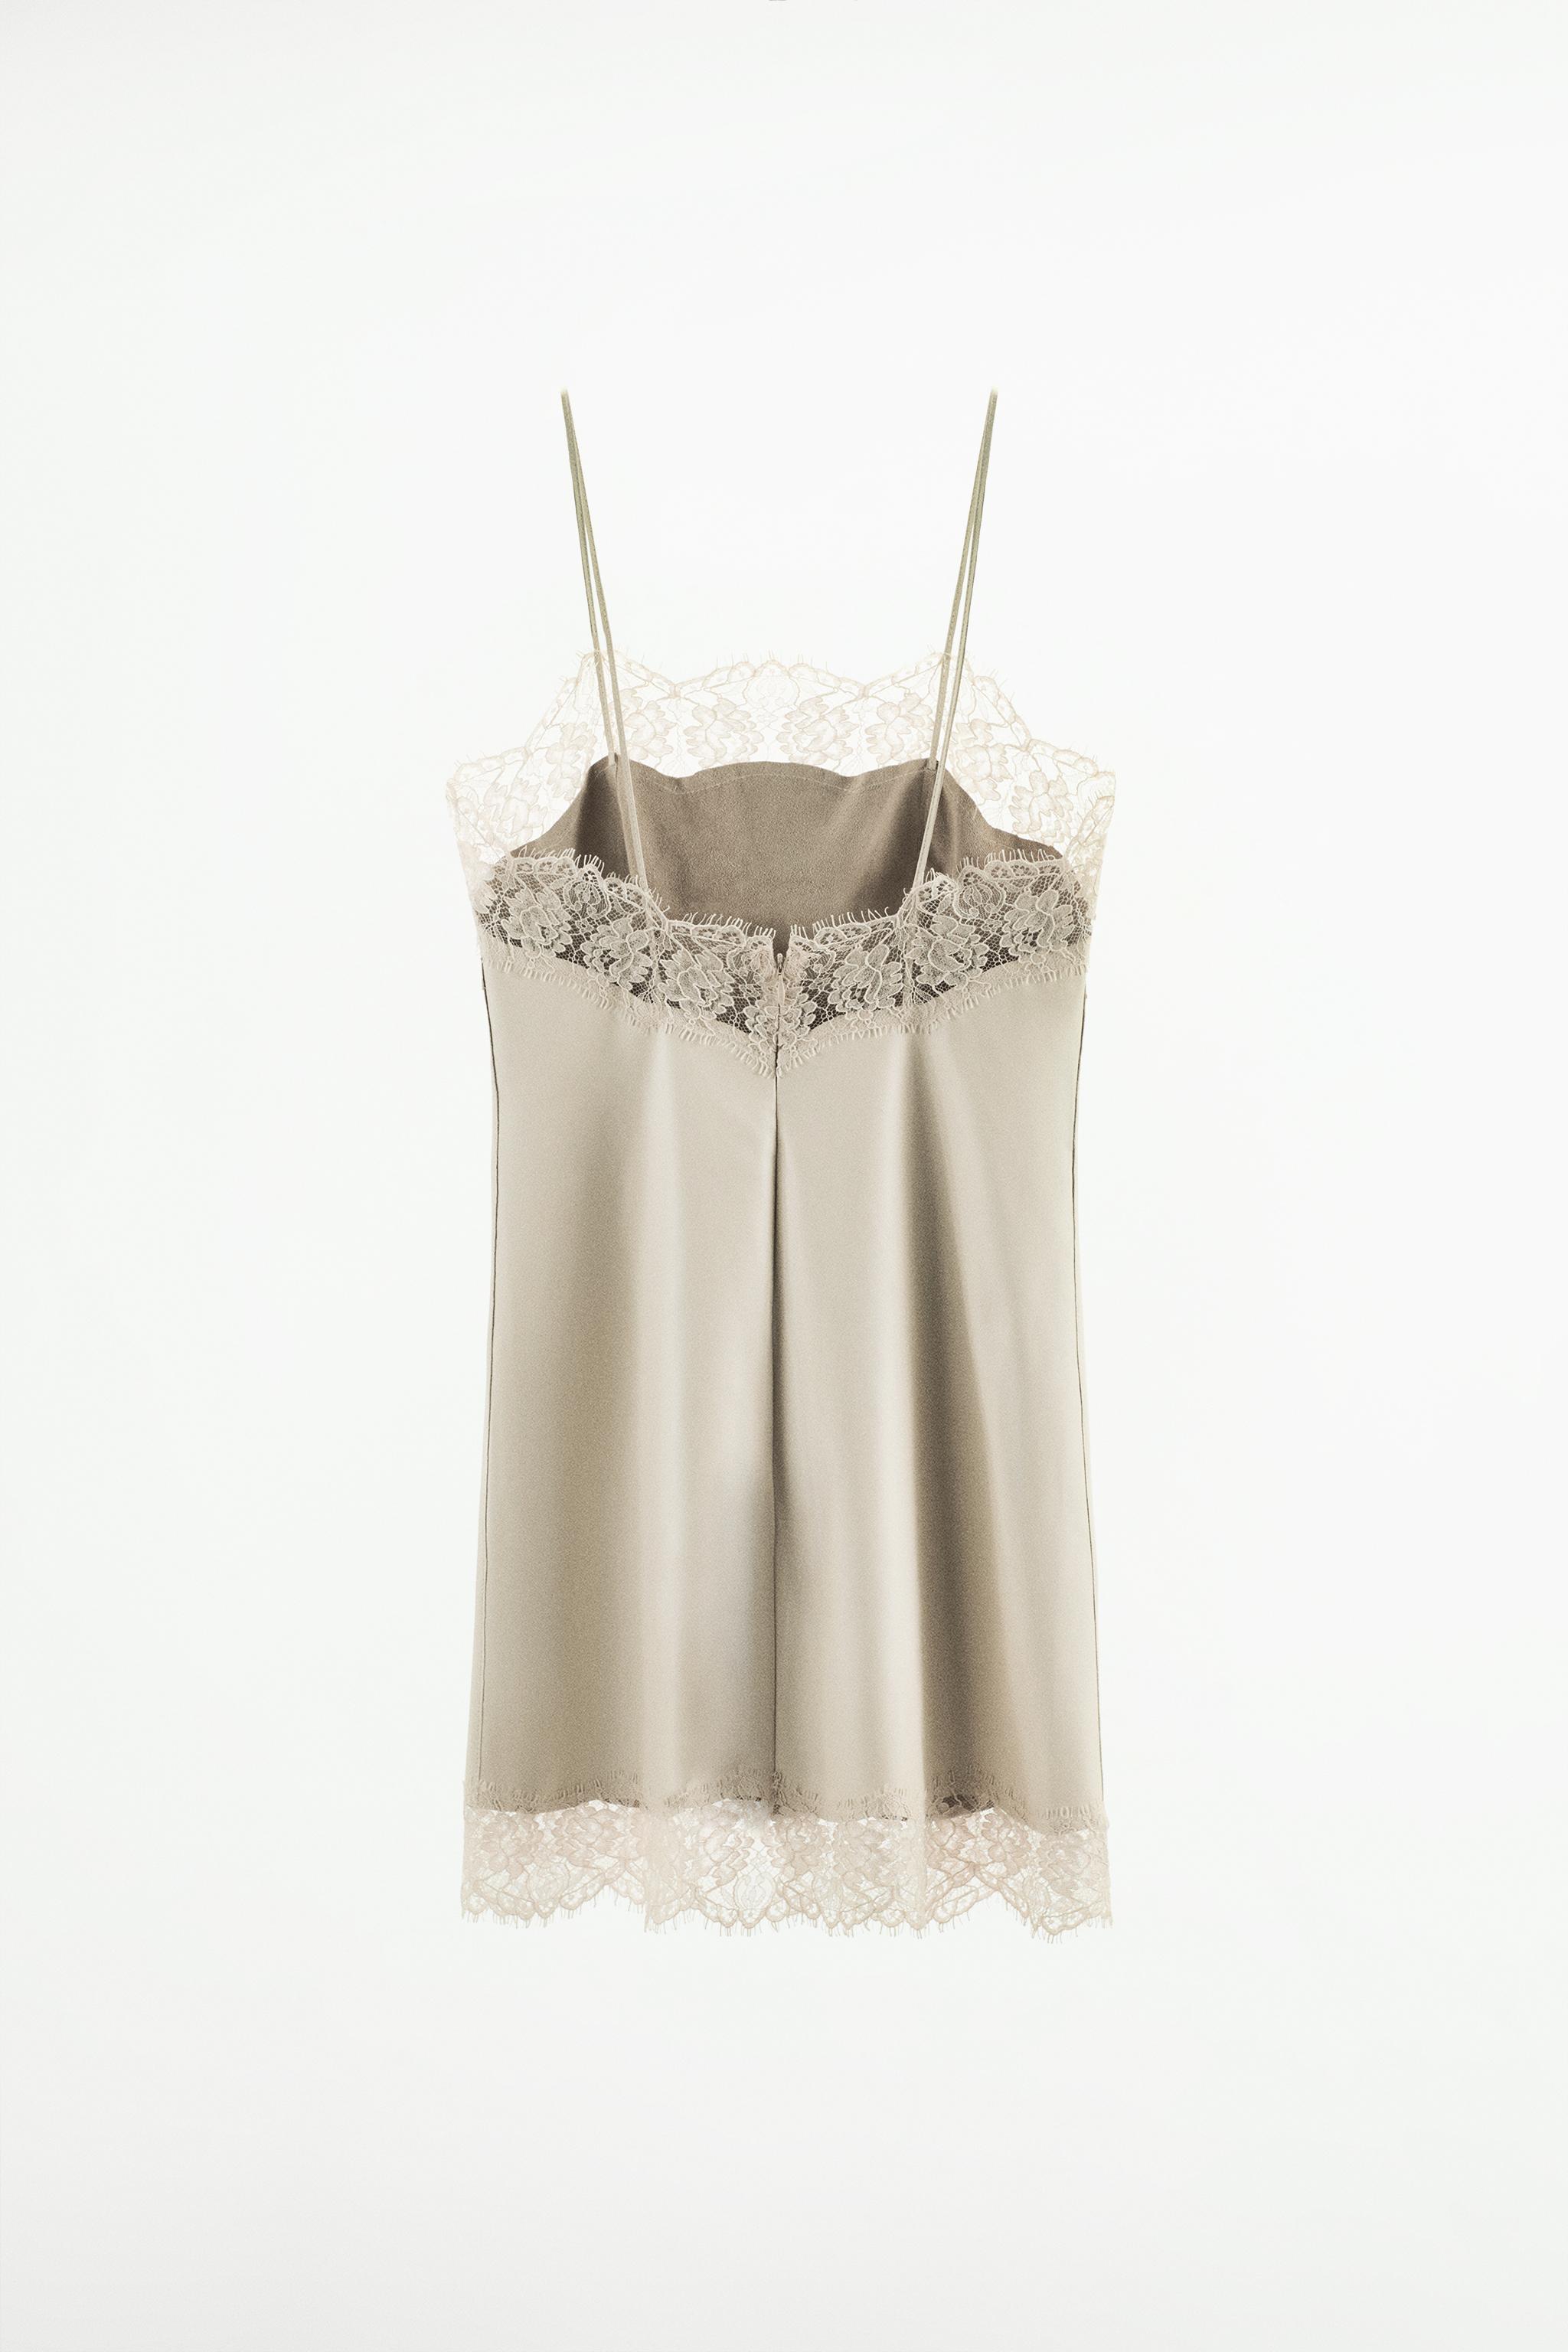 Zara oyster white lace dress with jewel buttons